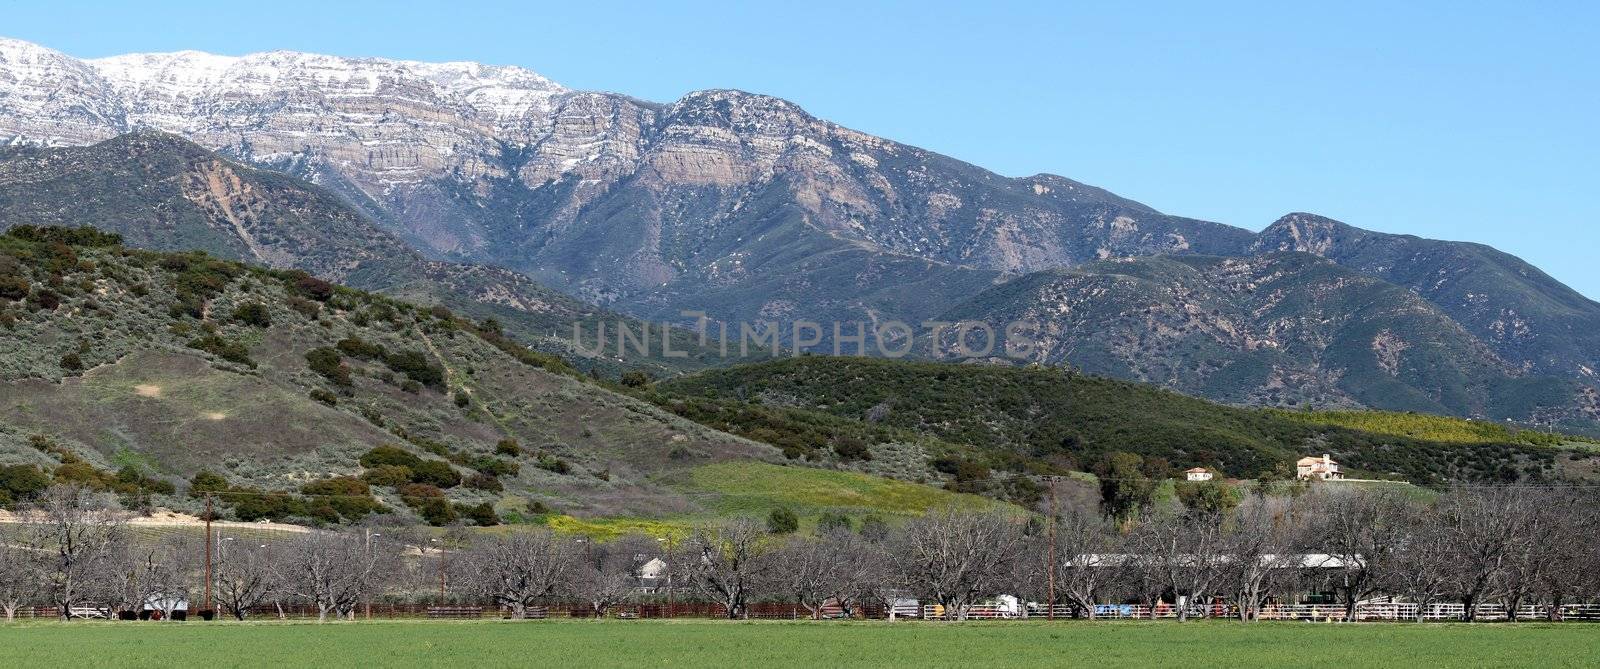 panorama of Topa Topa Mountains in Ojai with a farm in the foreground